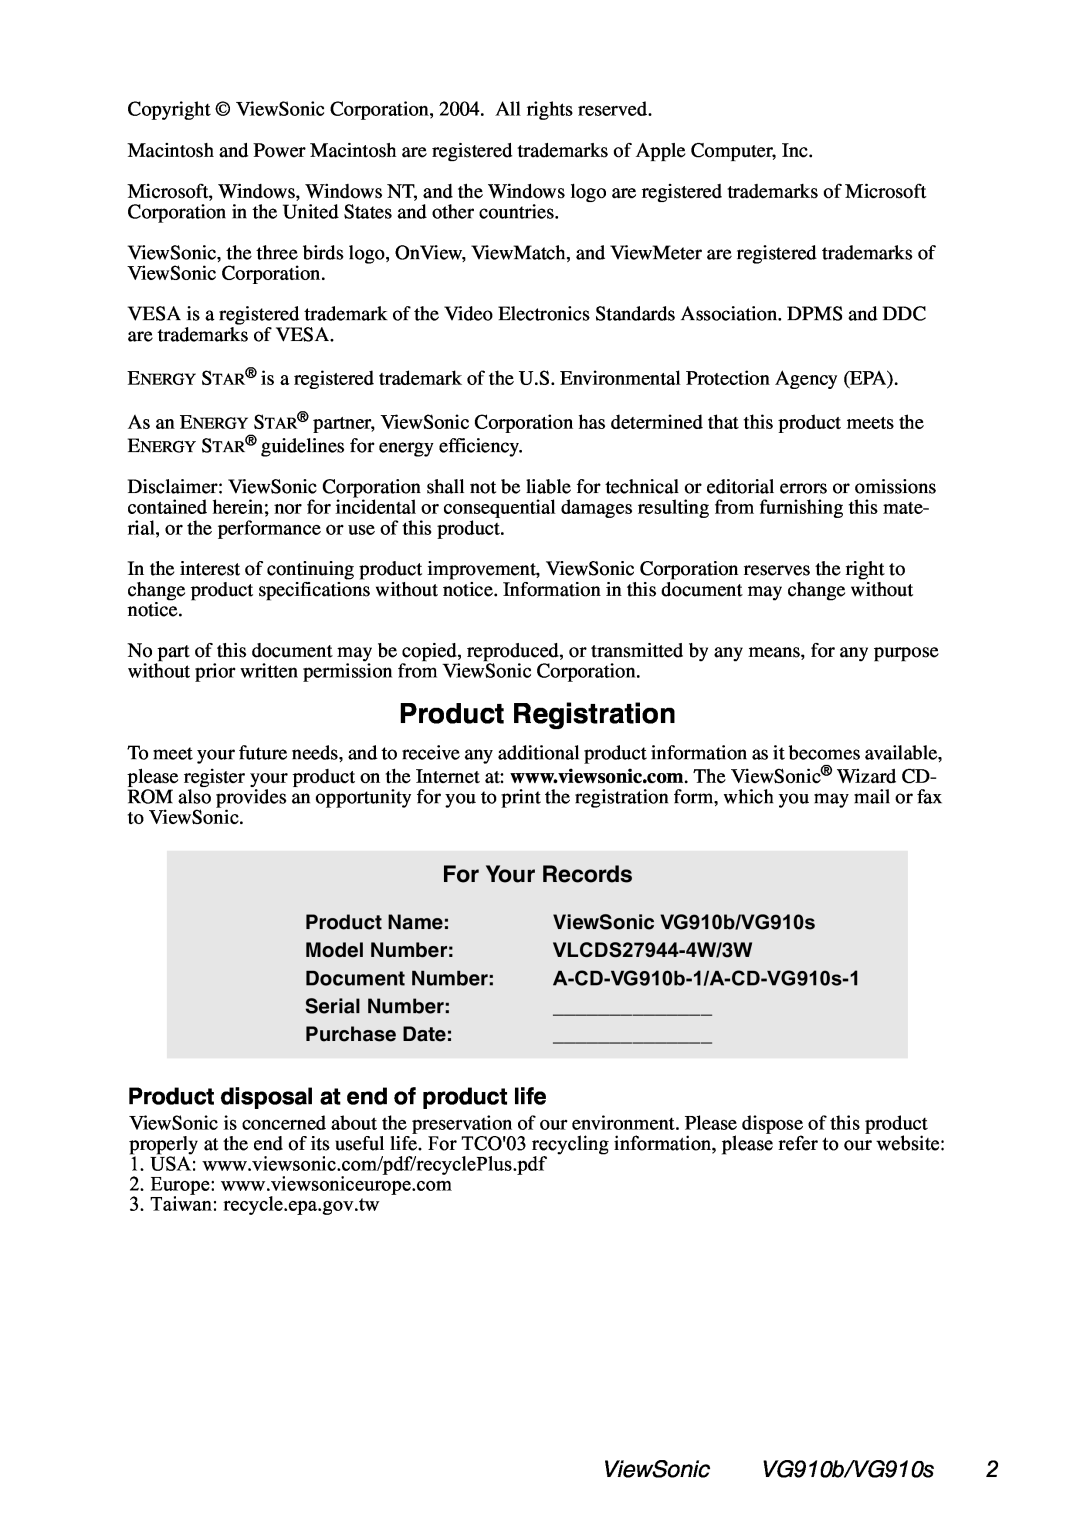 ViewSonic VG910B Product Registration, For Your Records, Product disposal at end of product life, ViewSonic VG910b/VG910s 